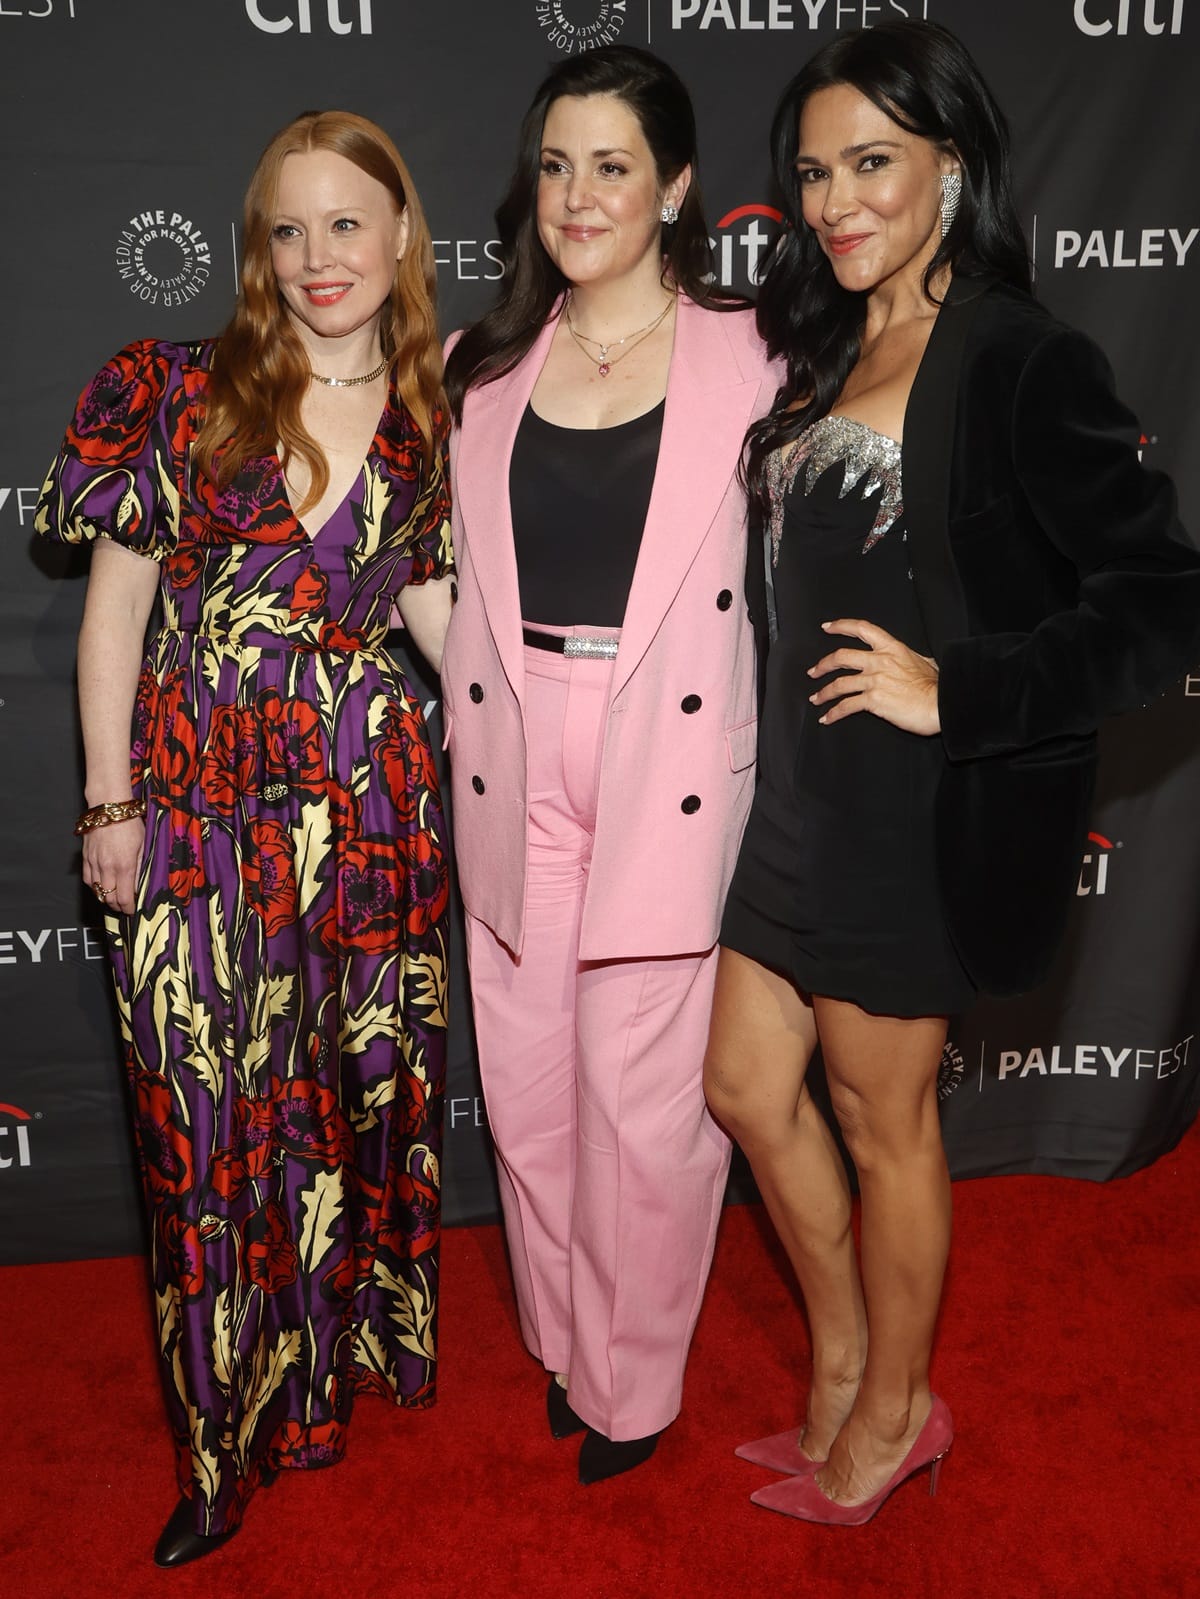 Simone Kessell (R) is the tallest among Lauren Ambrose (L), Melanie Lynskey (C), and herself, with a height of 5ft 7 ½ (171.5 cm), while Melanie is the second tallest at 5ft 6 ¼ (168.3 cm), and Lauren is the shortest with 5ft 5 (165.1 cm)